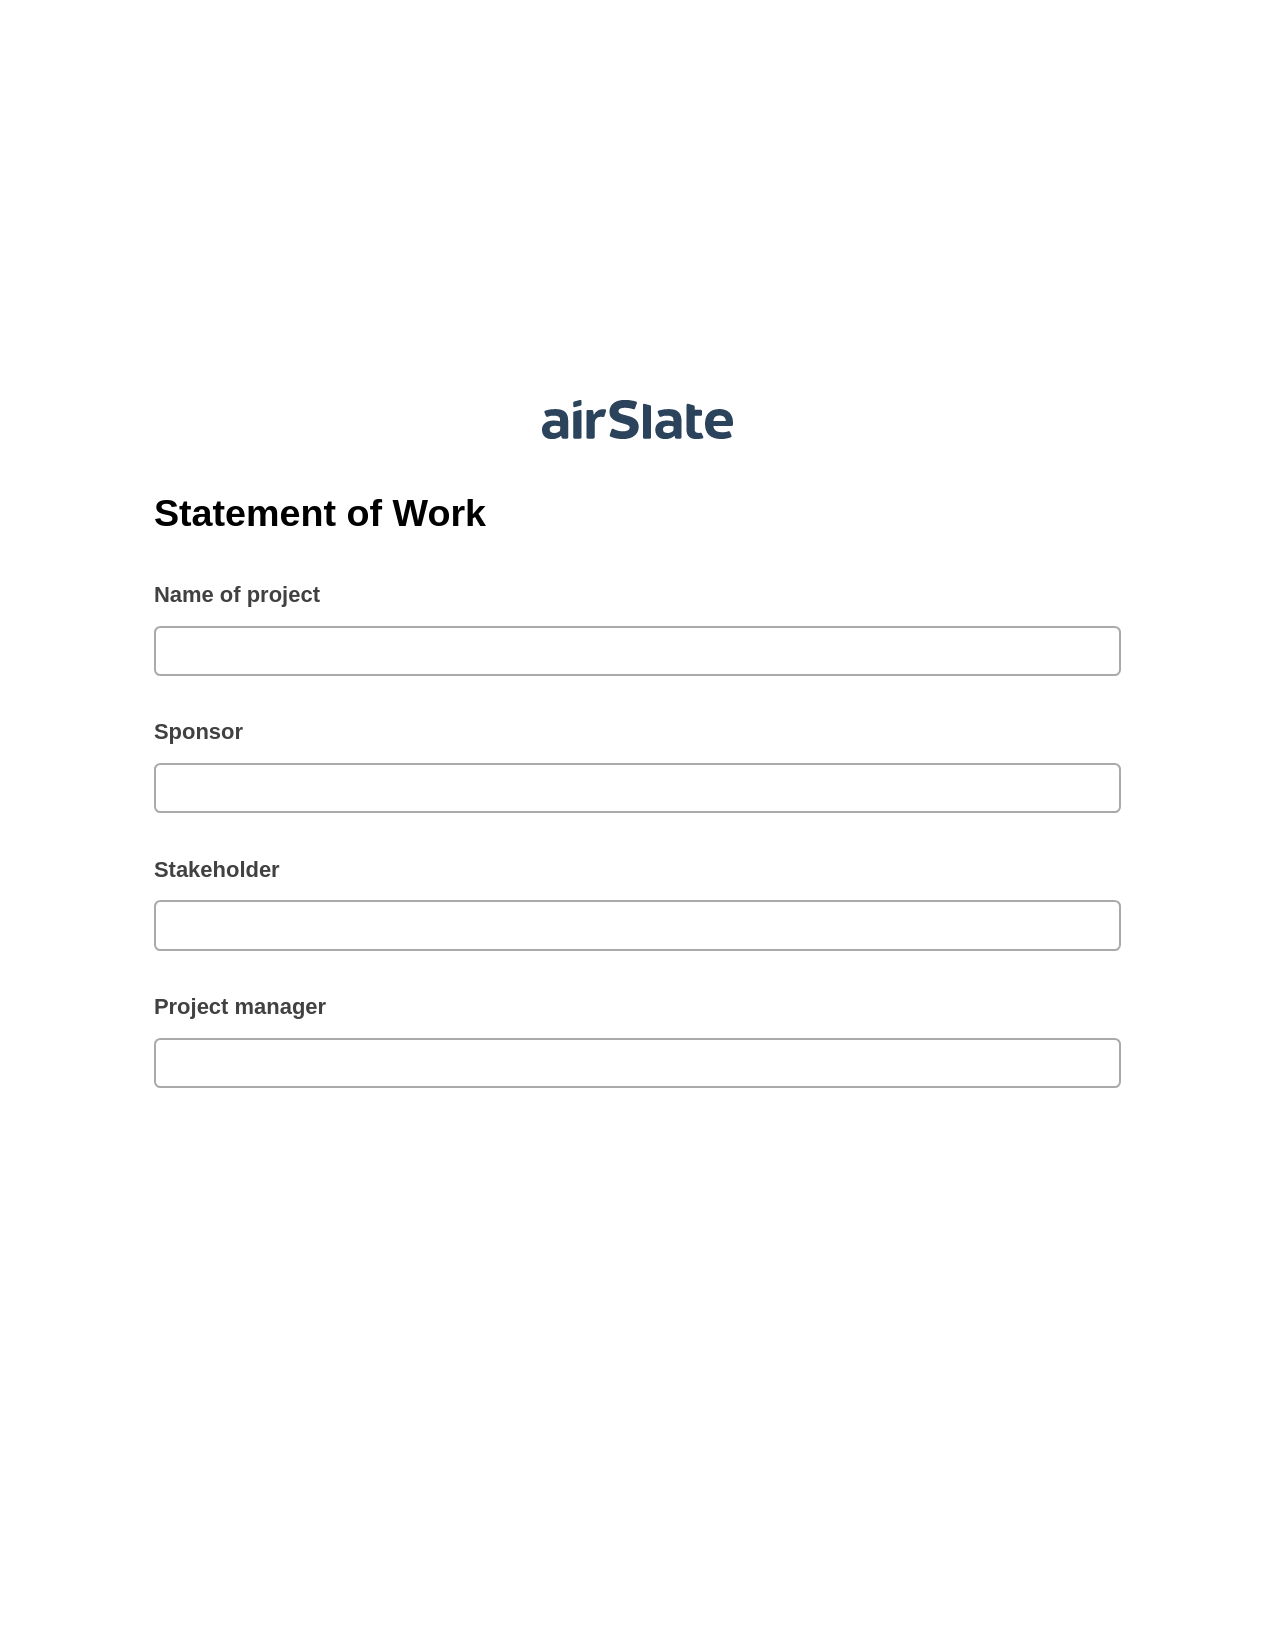 Statement of Work Pre-fill from CSV File Dropdown Options Bot, Create slate addon, Text Message Notification Postfinish Bot